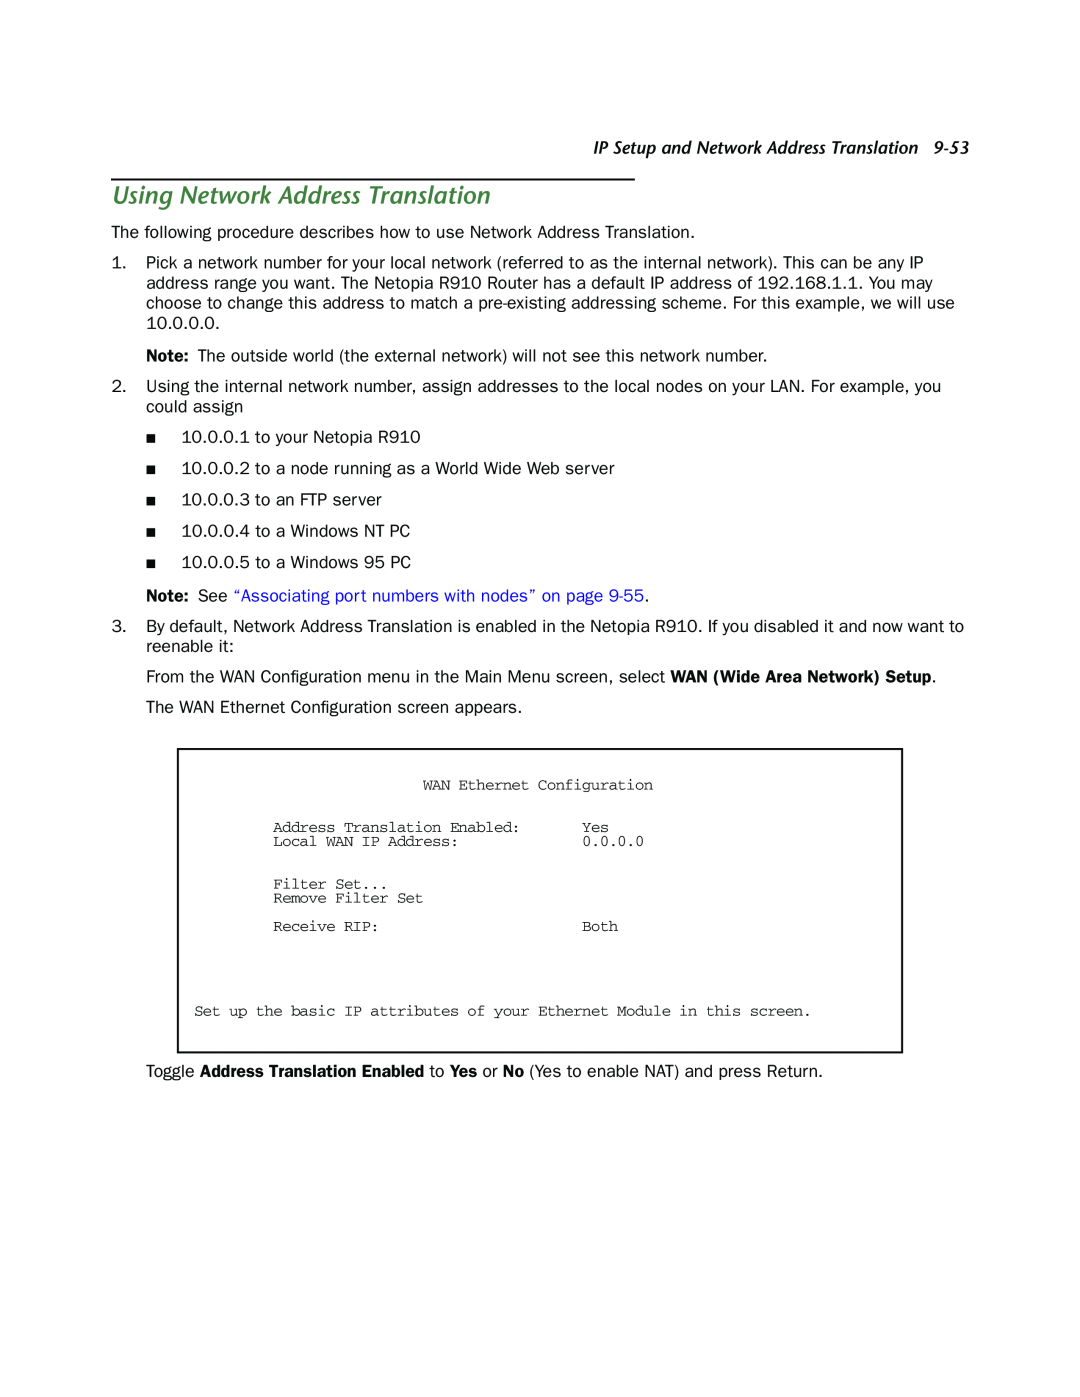 Netopia R910 manual Using Network Address Translation, Note See “Associating port numbers with nodes” on page 